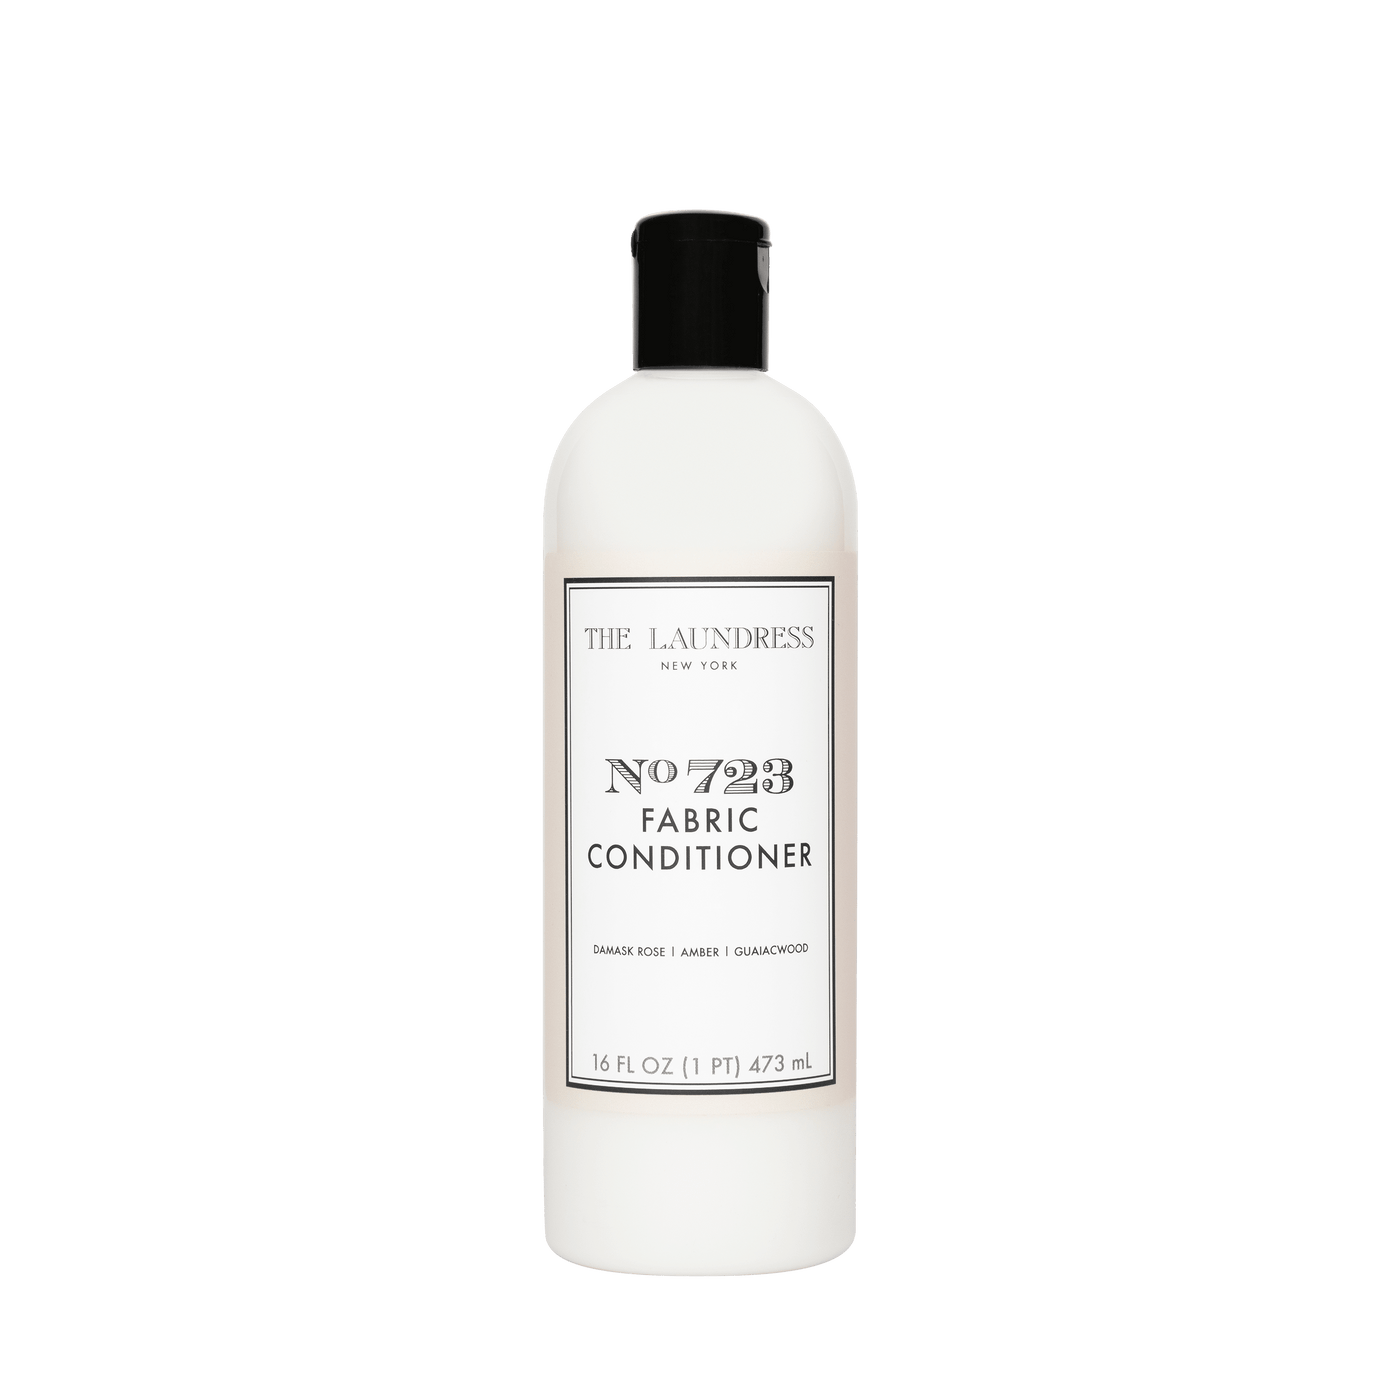 No. 723 Fabric Conditioner Household Supplies The Laundress